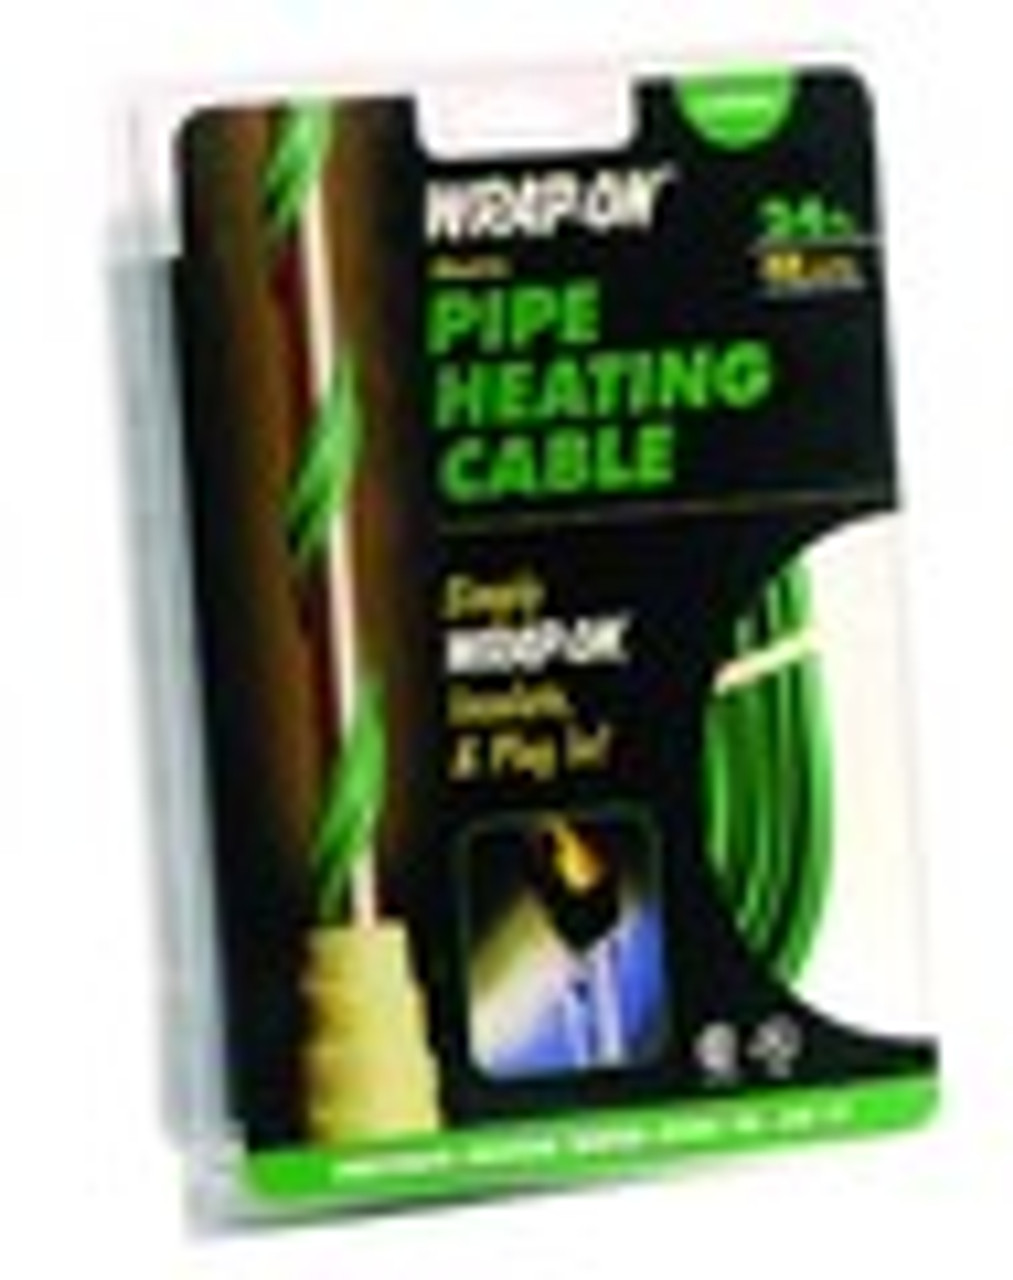 Heating Cables and Insulation - A Variety of Pipe Insulation Products and Cables  for Less!